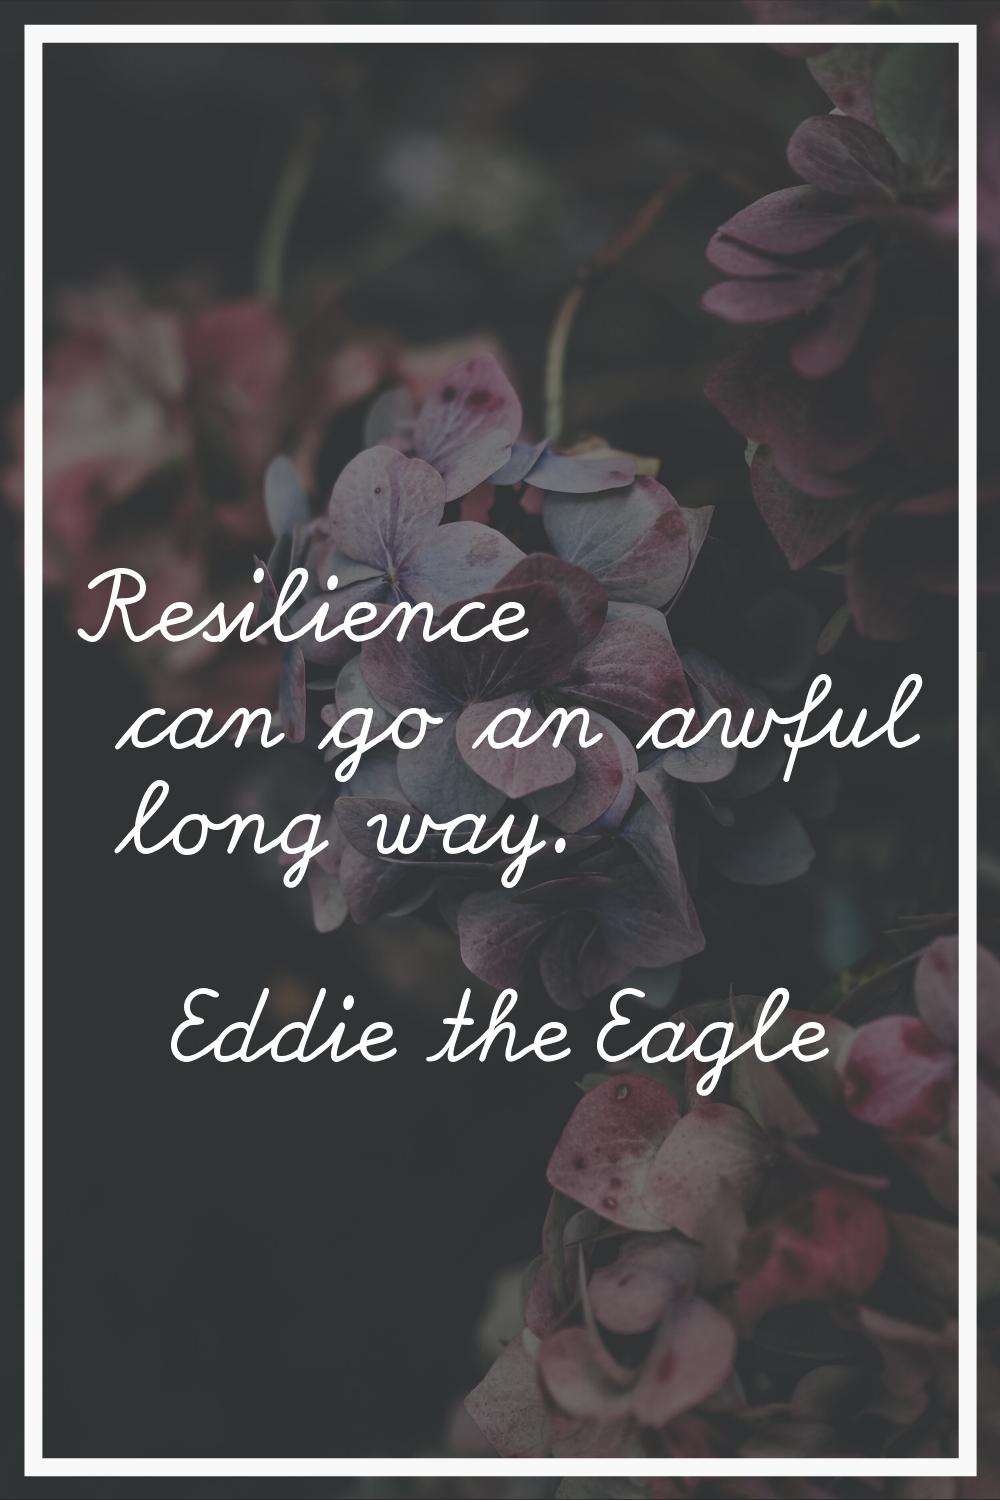 Resilience can go an awful long way.